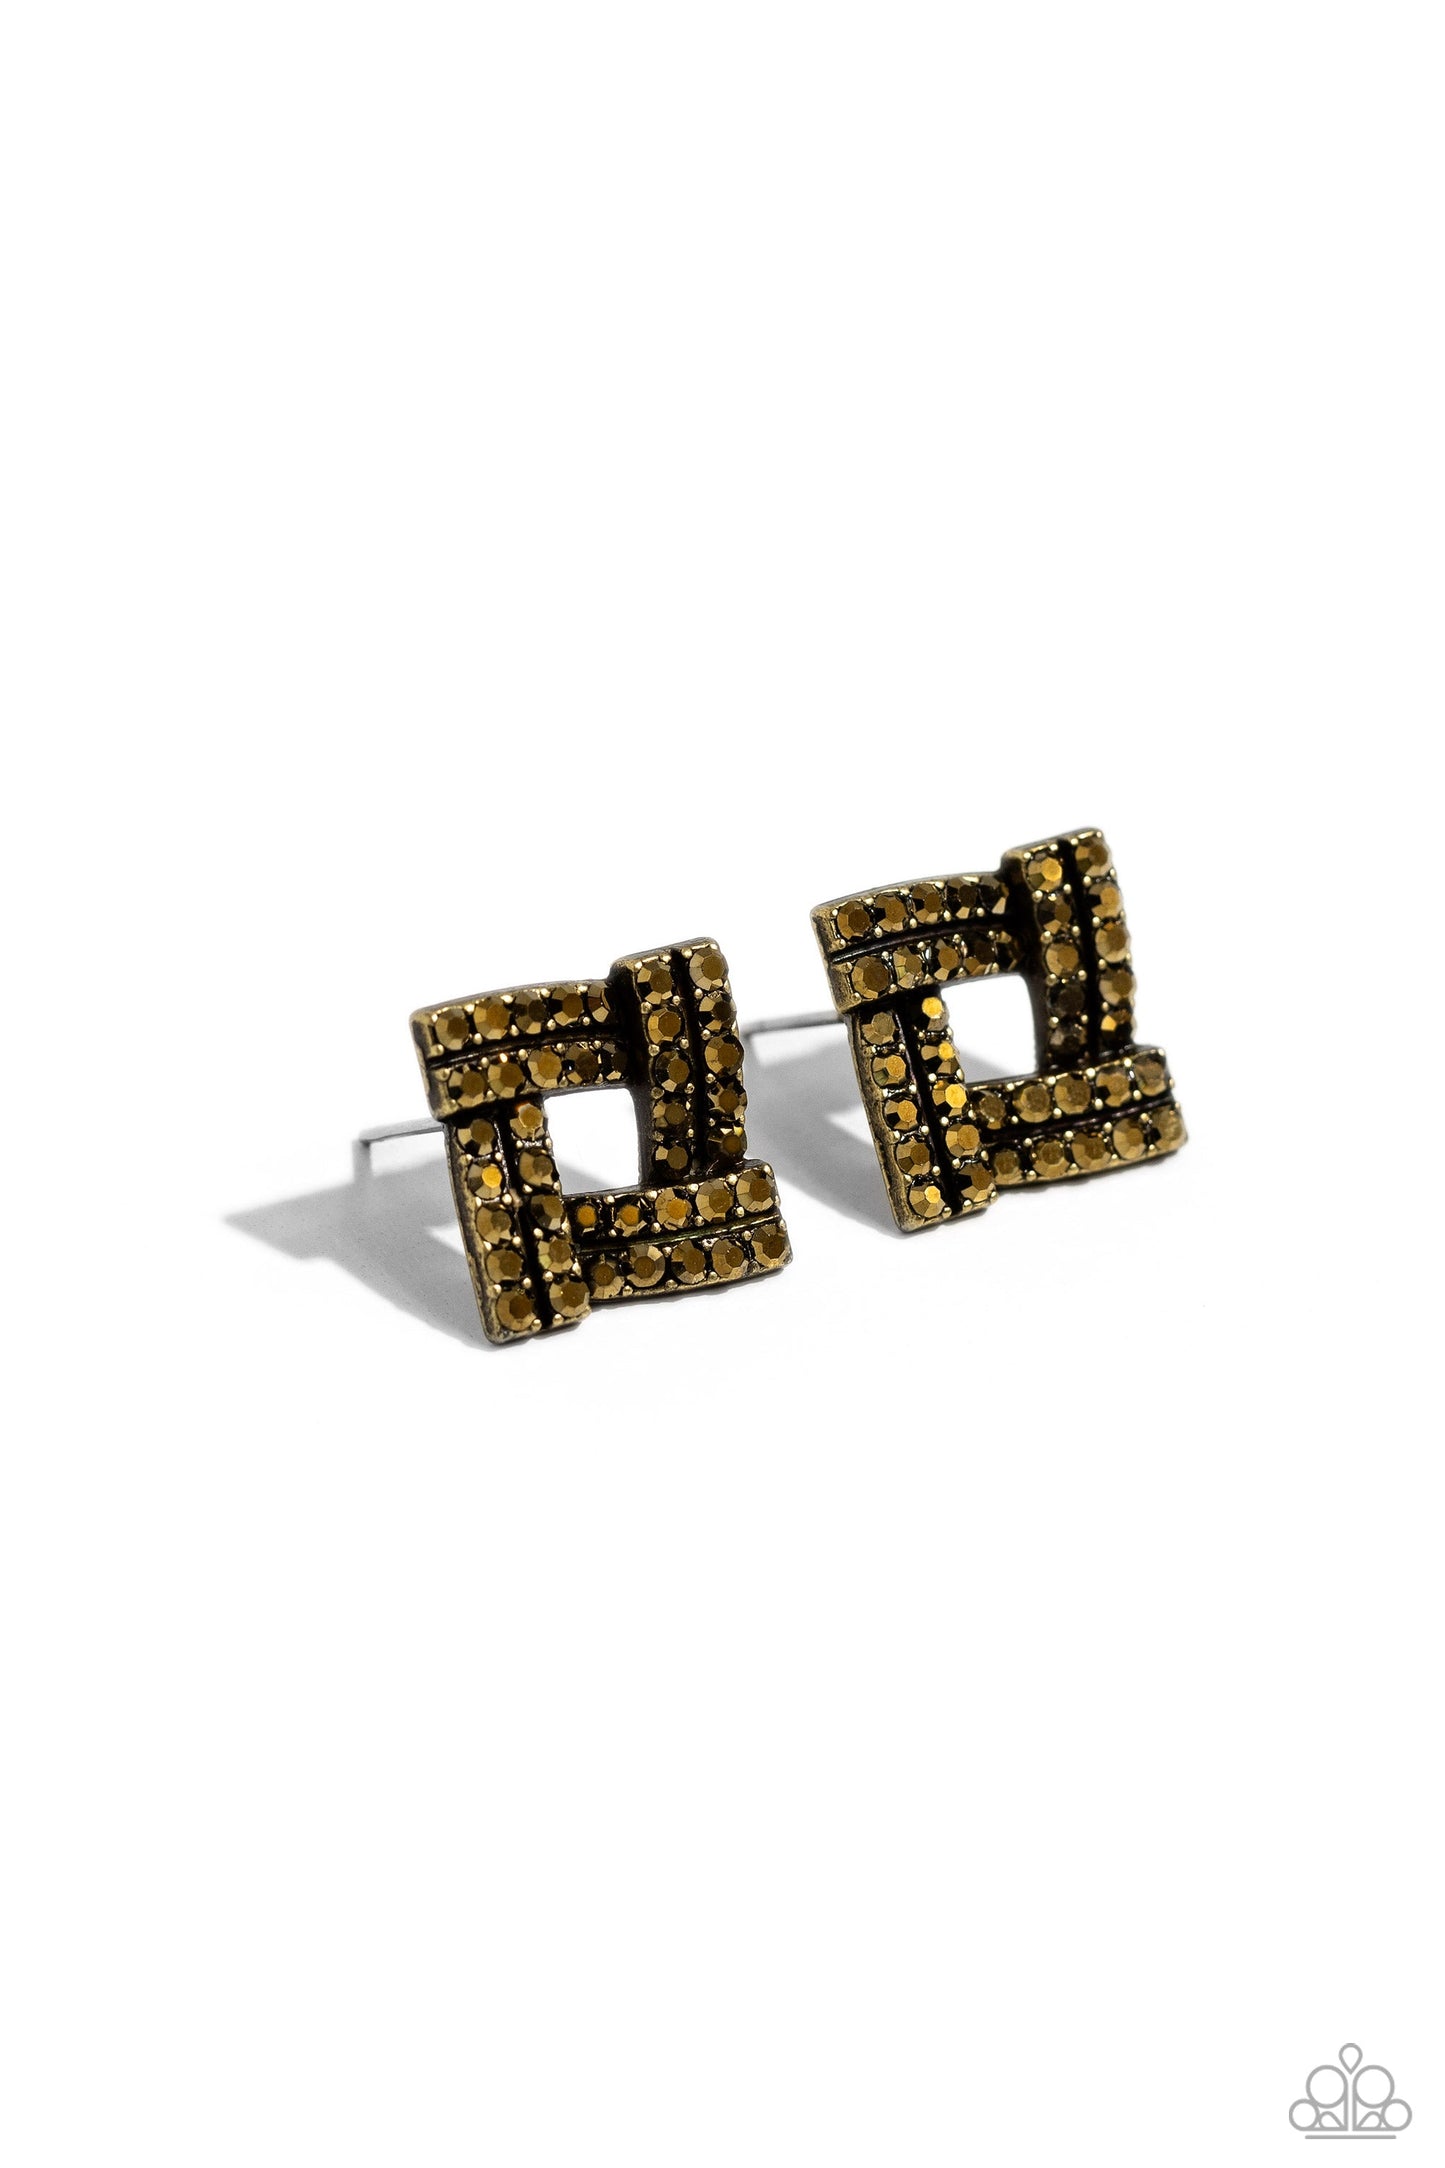 Times Square Scandalous - Brass Earrings - Paparazzi Accessories - Dotted in dainty aurum rhinestones, curved rows of brass bars delicately overlap into a stunning square frame.